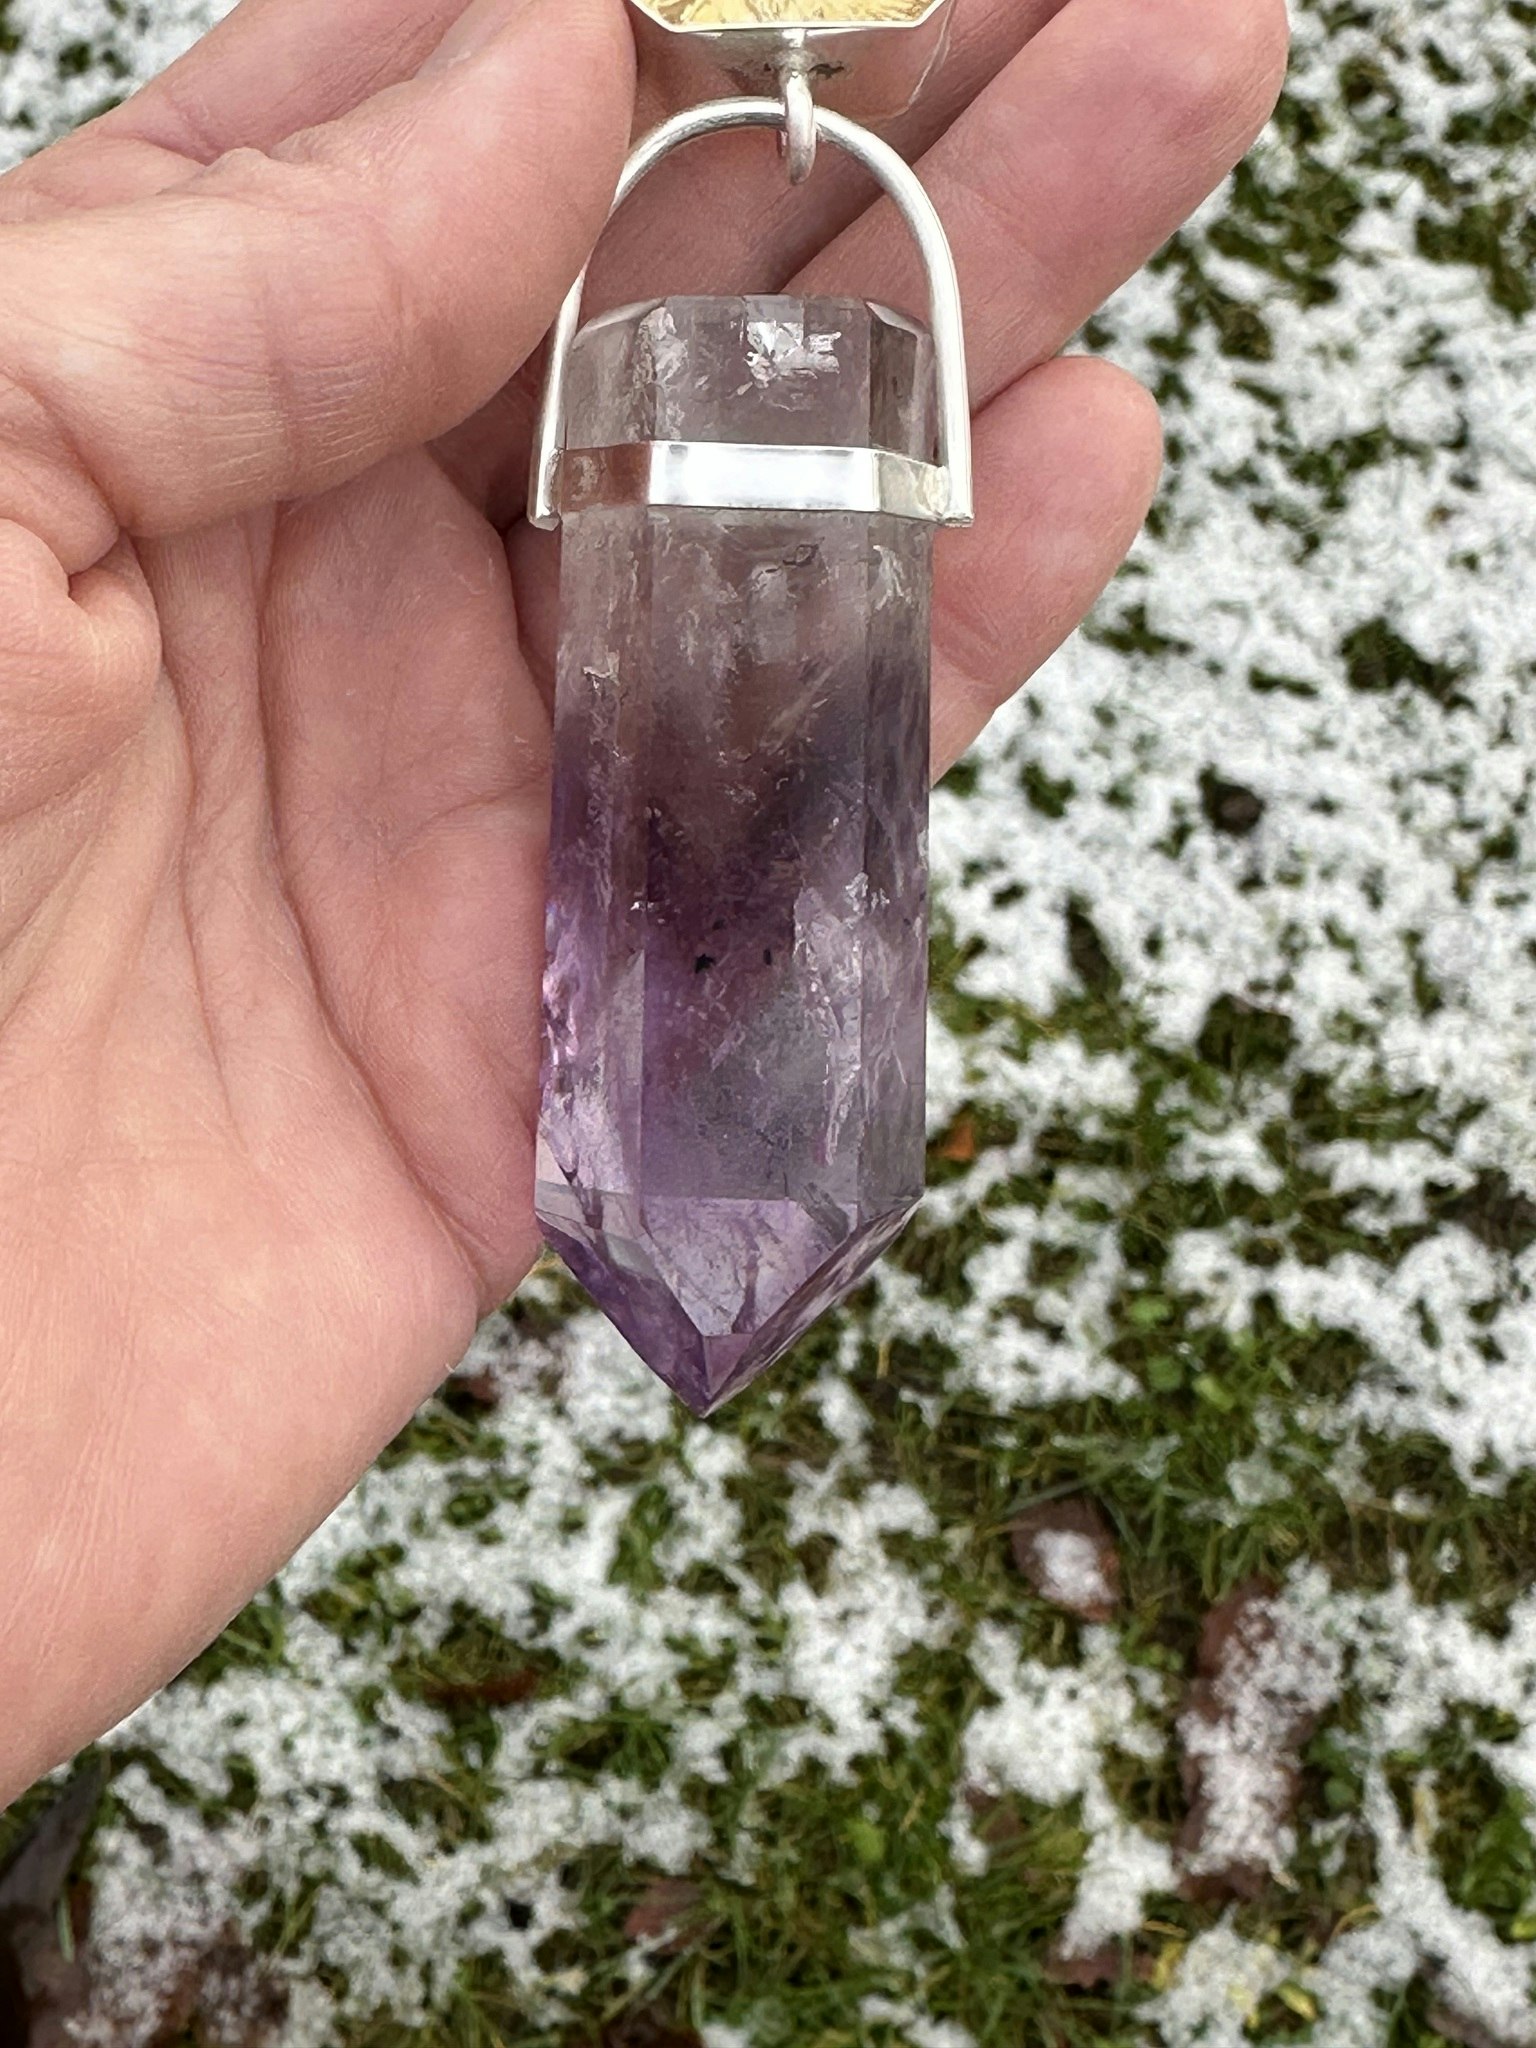 “The lighthouse” citrine with very special amethyst with hemstite inclusions